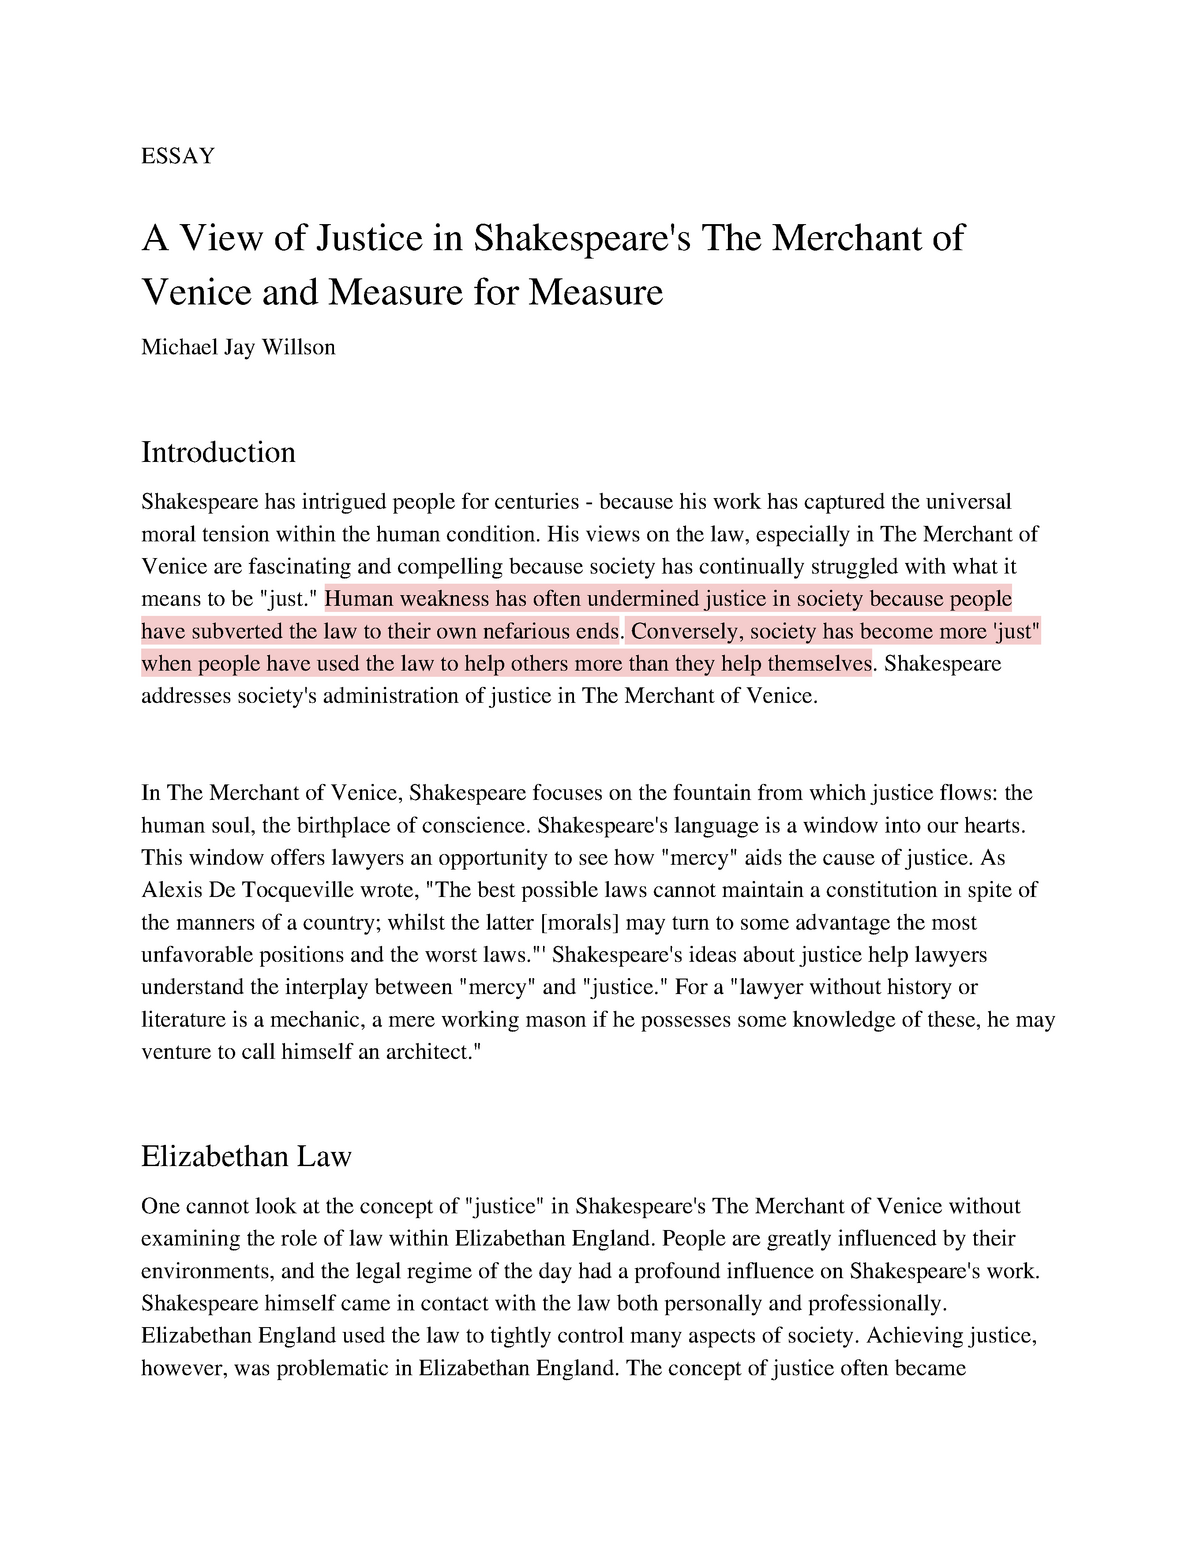 justice in the merchant of venice essay